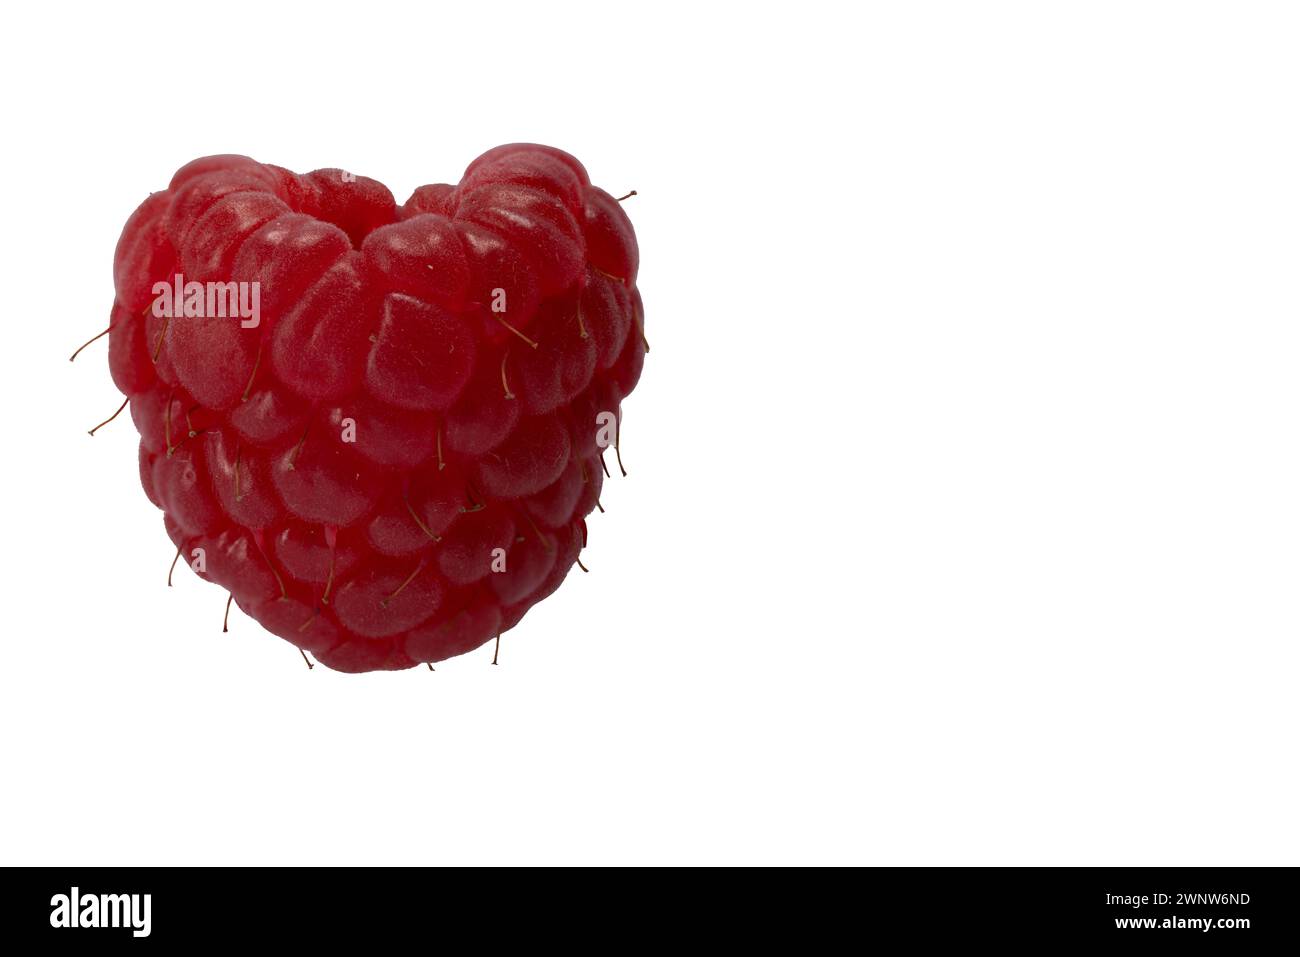 Macro of fresh red raspberry on left side of the photograph with white space. White background. Stock Photo